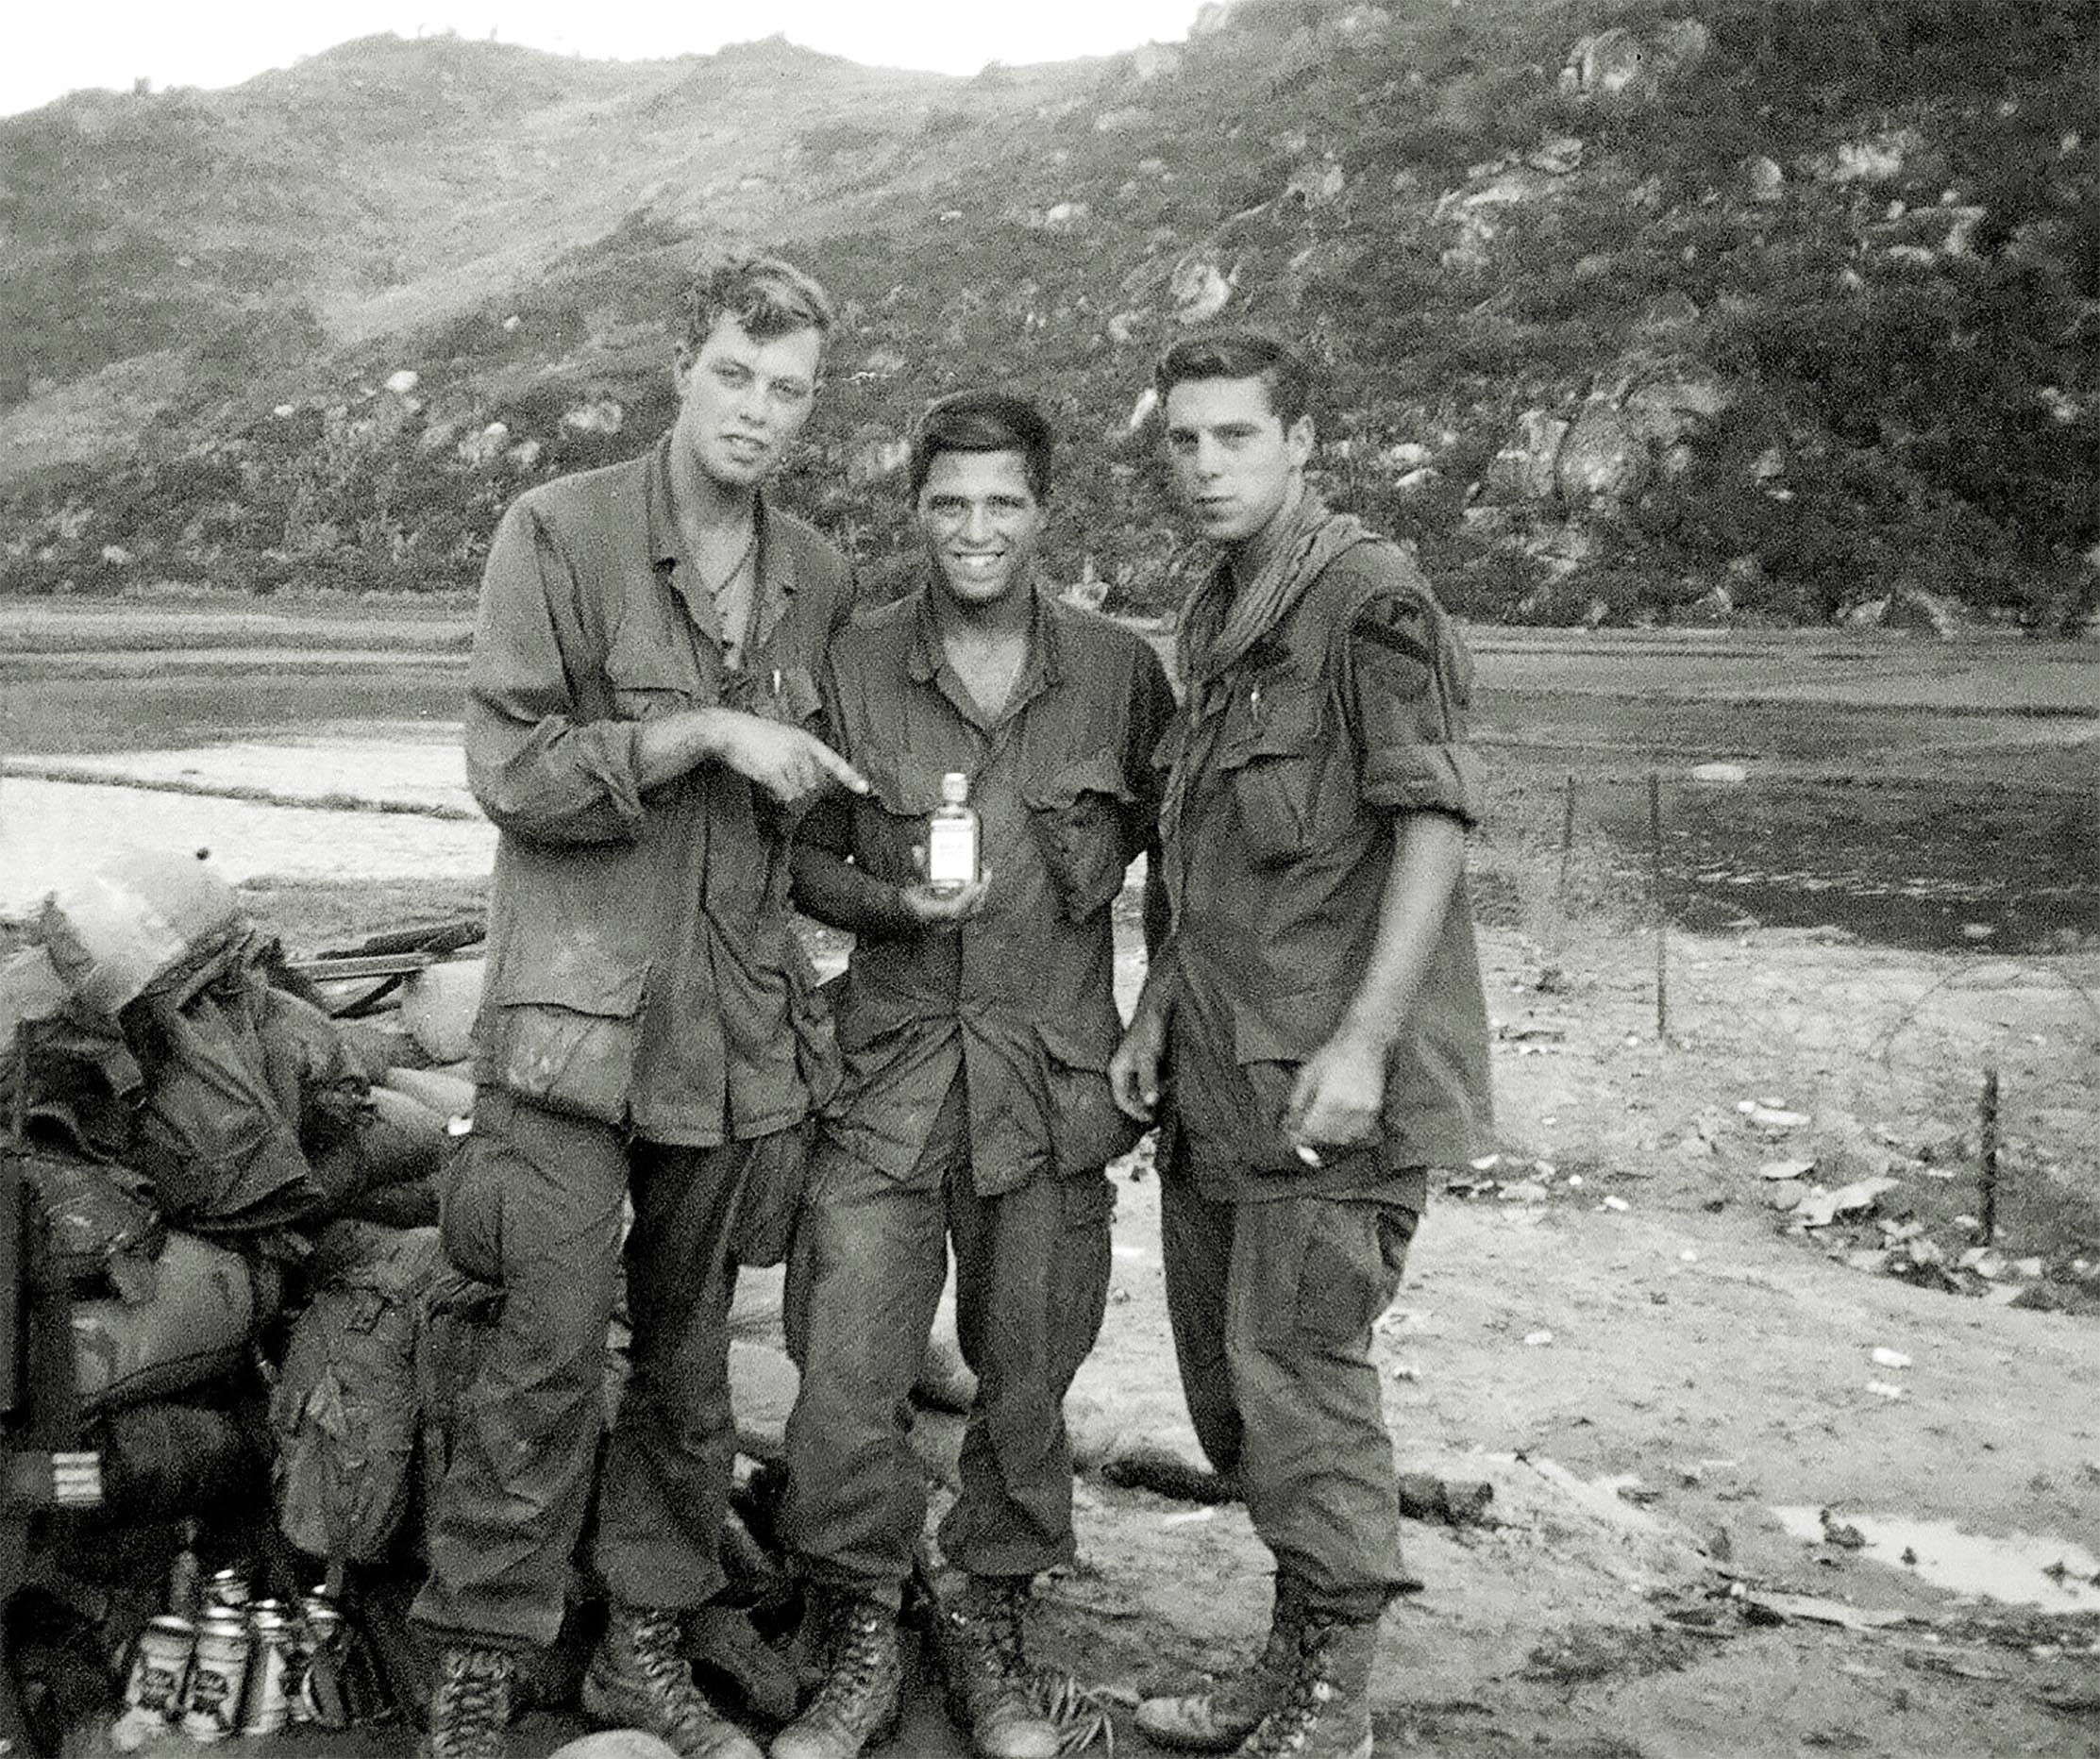 In his hunt for friends from the bar in Inwood, New York, Donohue found Rick Duggan, far left, of the 1st Cavalry Division (Airmobile), at Landing Zone Jane in northernmost South Vietnam. The men are holding a bottle of whiskey. Donohueâ€™s Pabst Blue Ribbon is waiting in the lower left corner. / Courtesy John Donohue